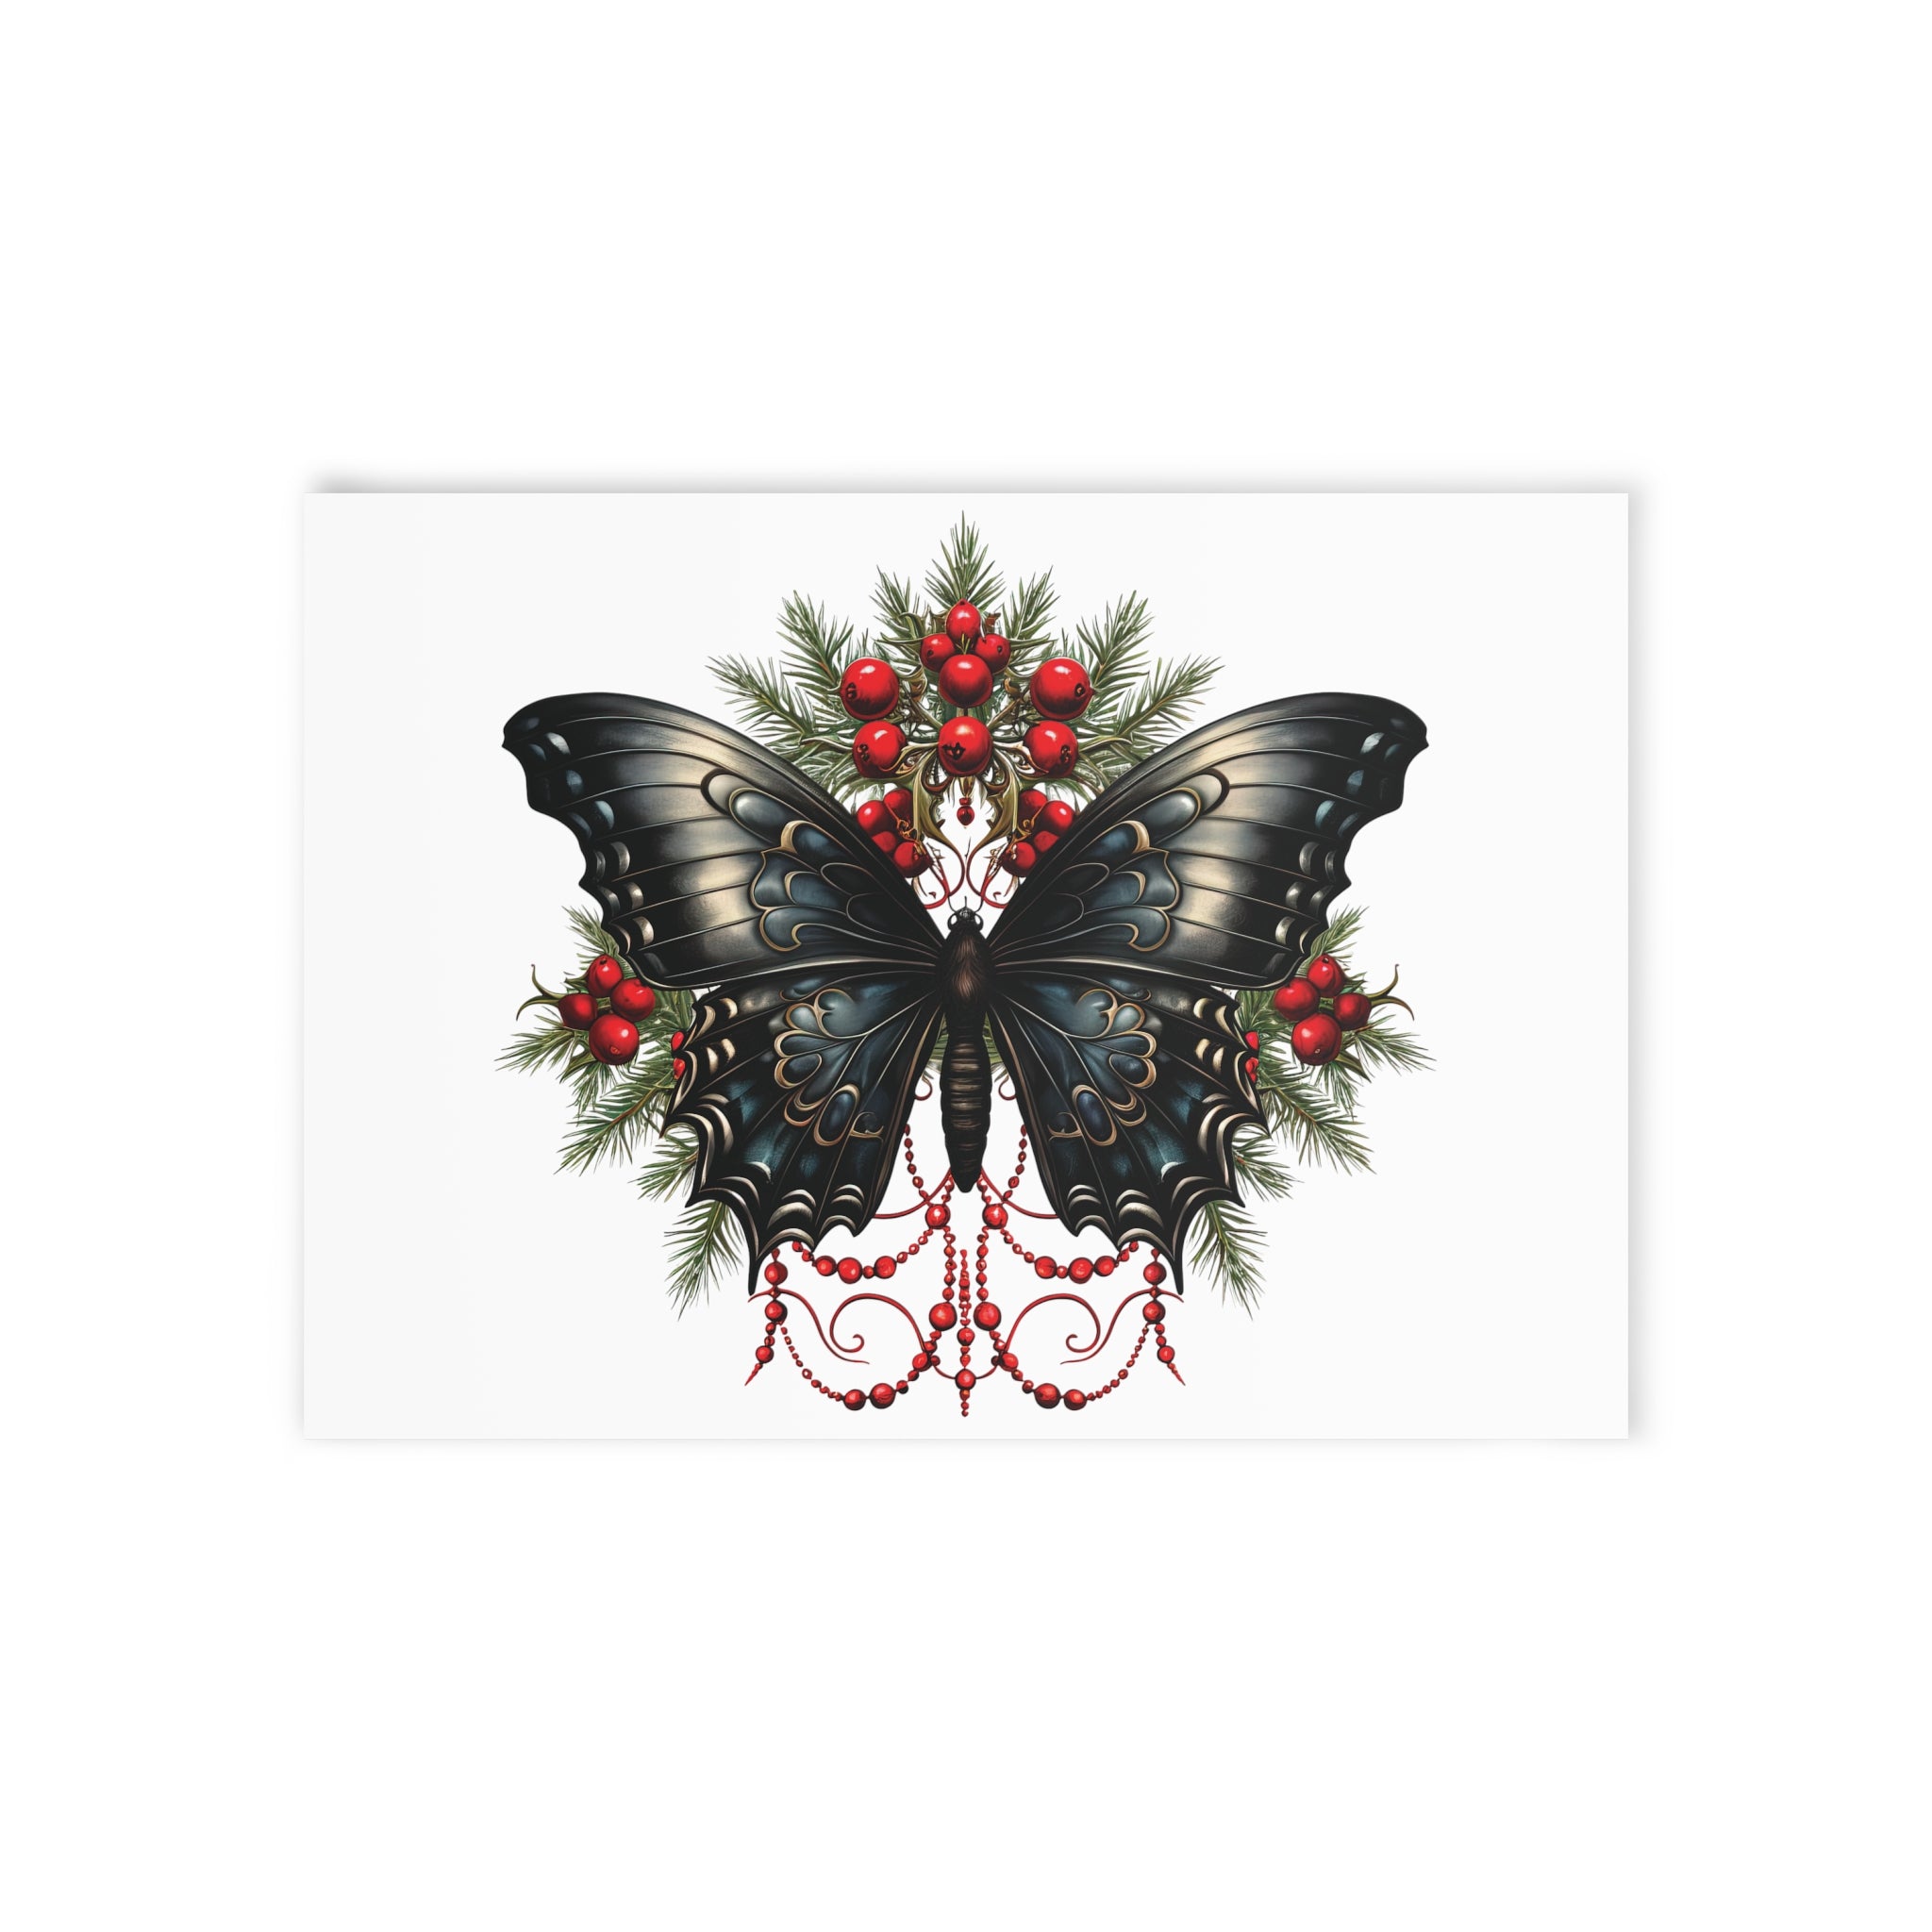 Butterfly, Vintage Gothic ~ Christmas - One-Sided Greeting Card/Art Print with Envelope, 300gsm FSC-Certified